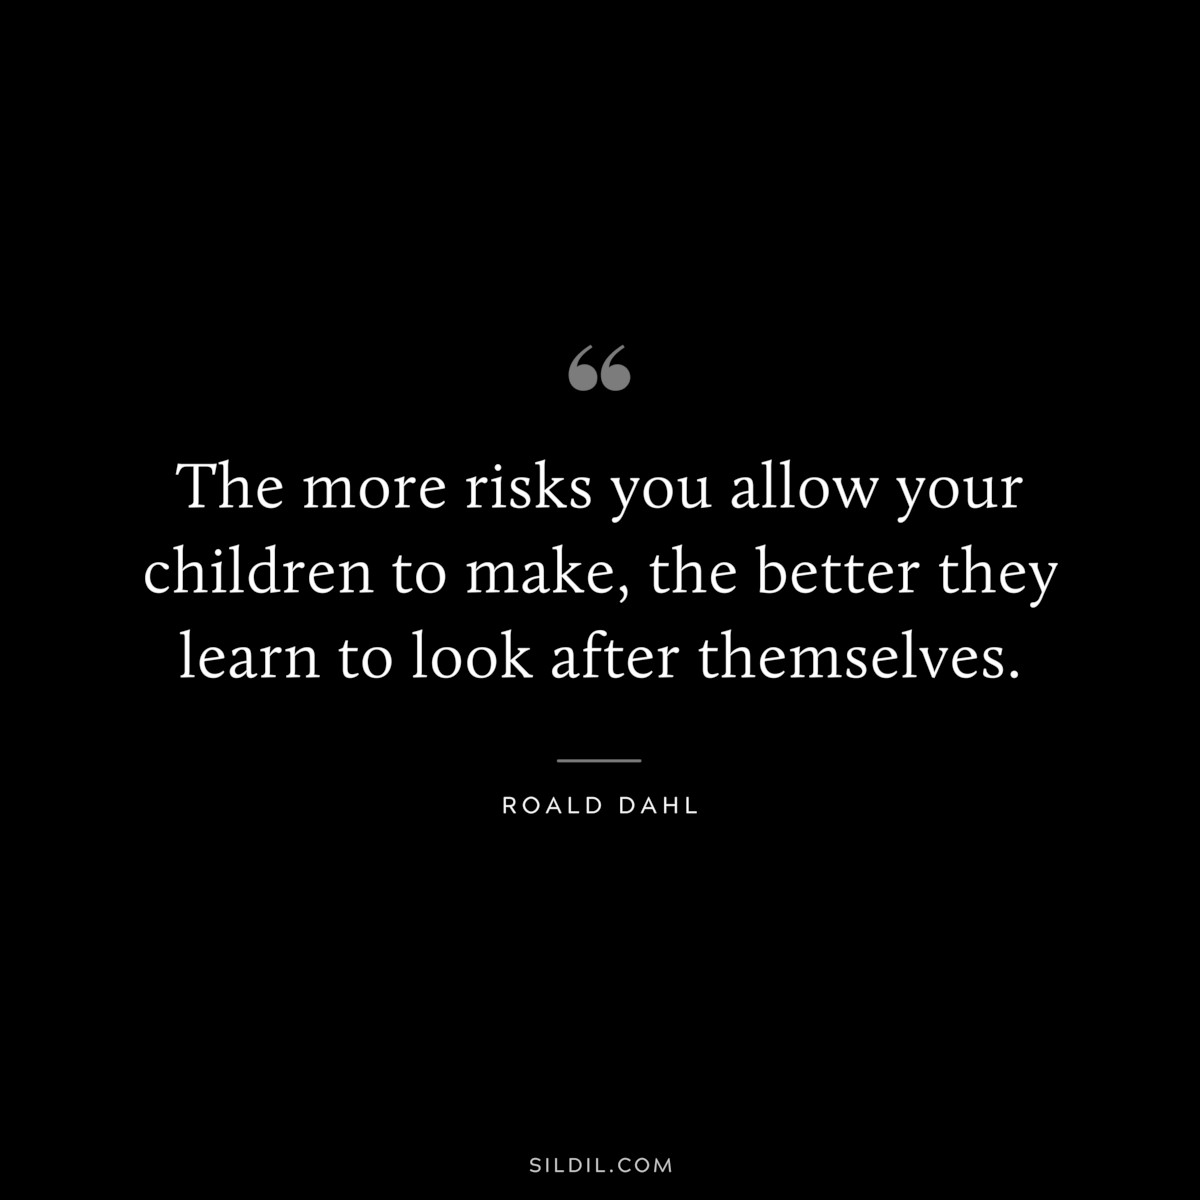 The more risks you allow your children to make, the better they learn to look after themselves. ― Roald Dahl